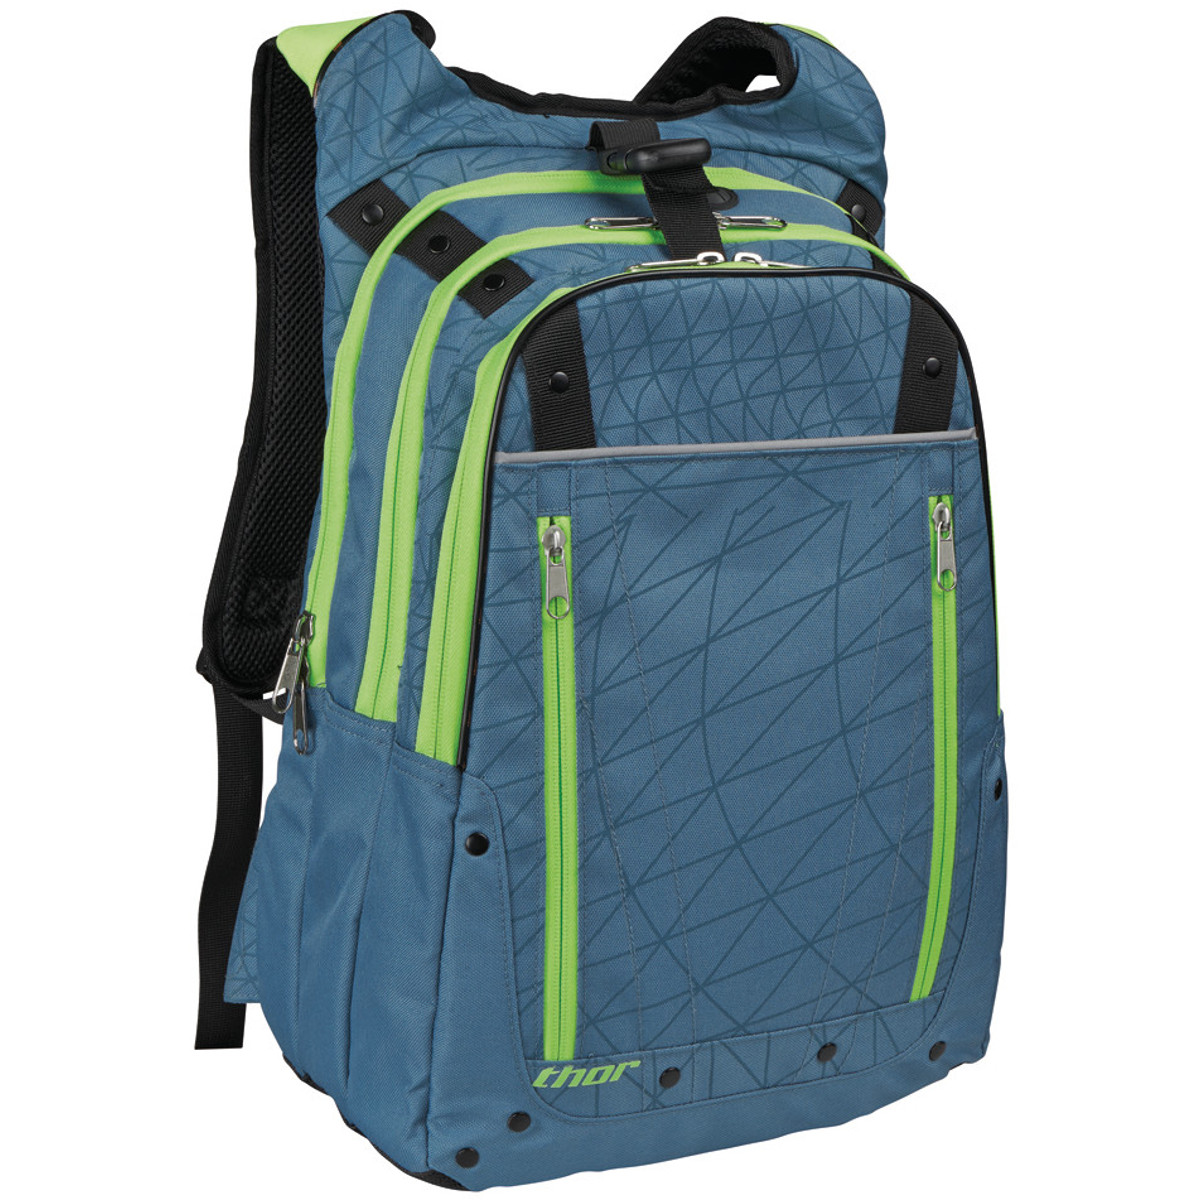 Thor Backpack with Hydration System Compartment Reservoir Steel/Green